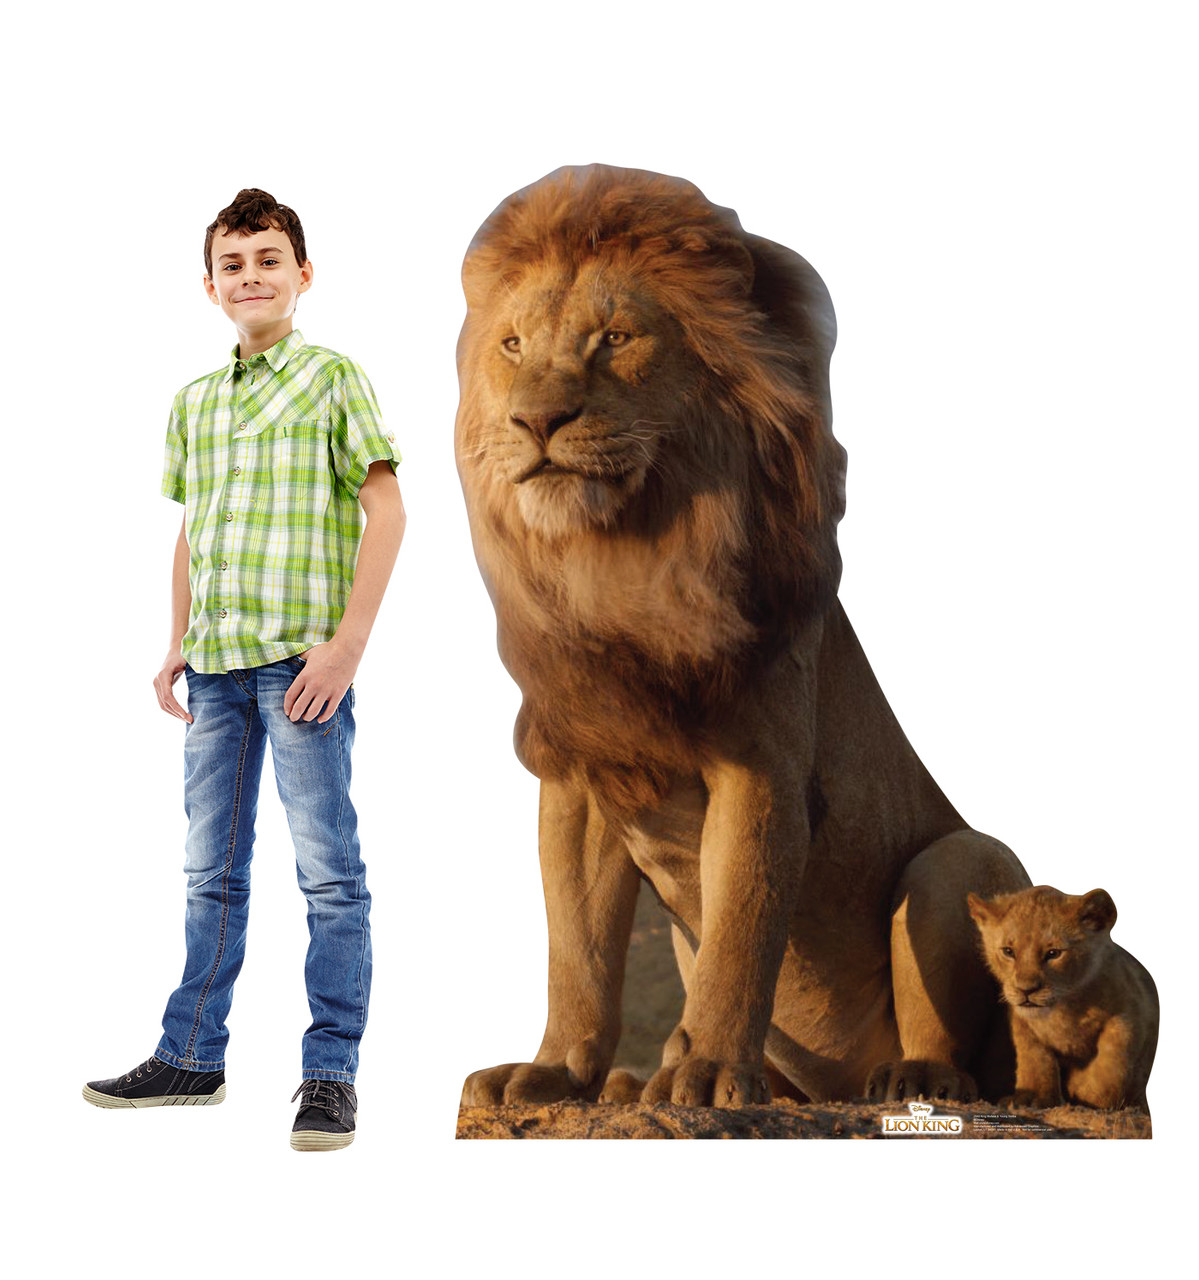 Life-size cardboard standee of King Mufasa and Young Simba from Disney's live action film The Lion King Lifesize